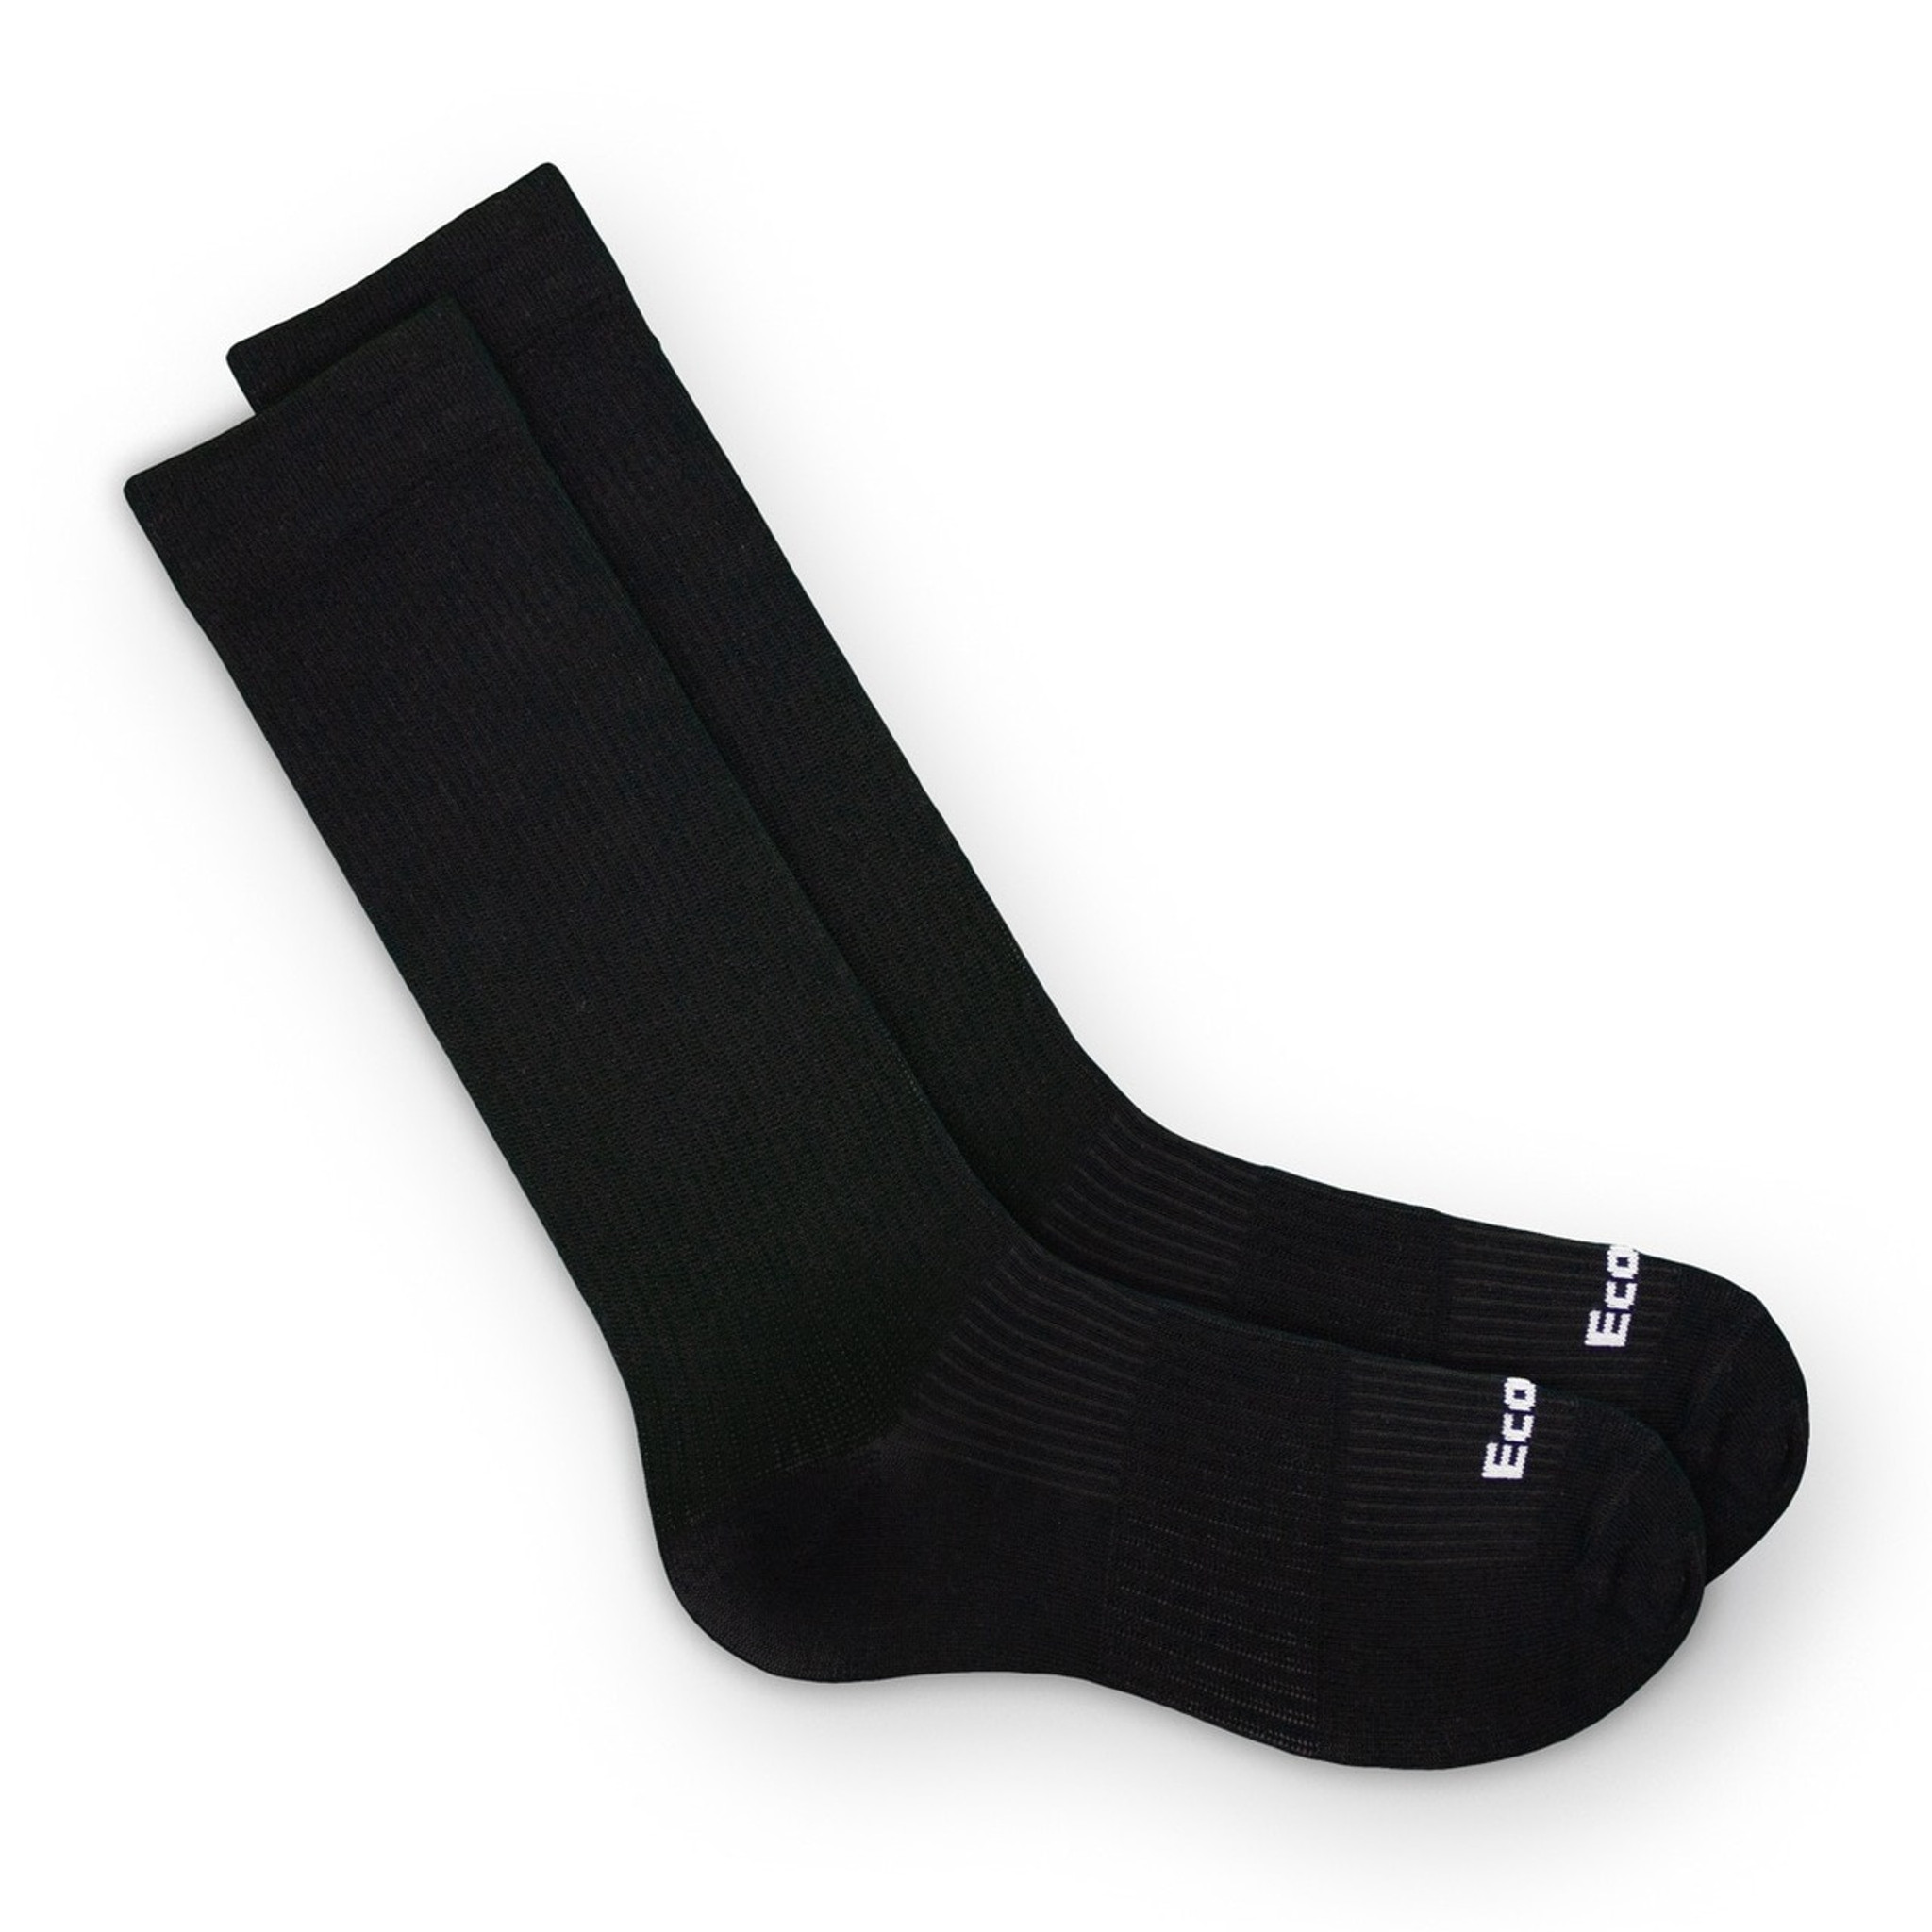 Bamboo Compression Black - The Boot Life, LLC